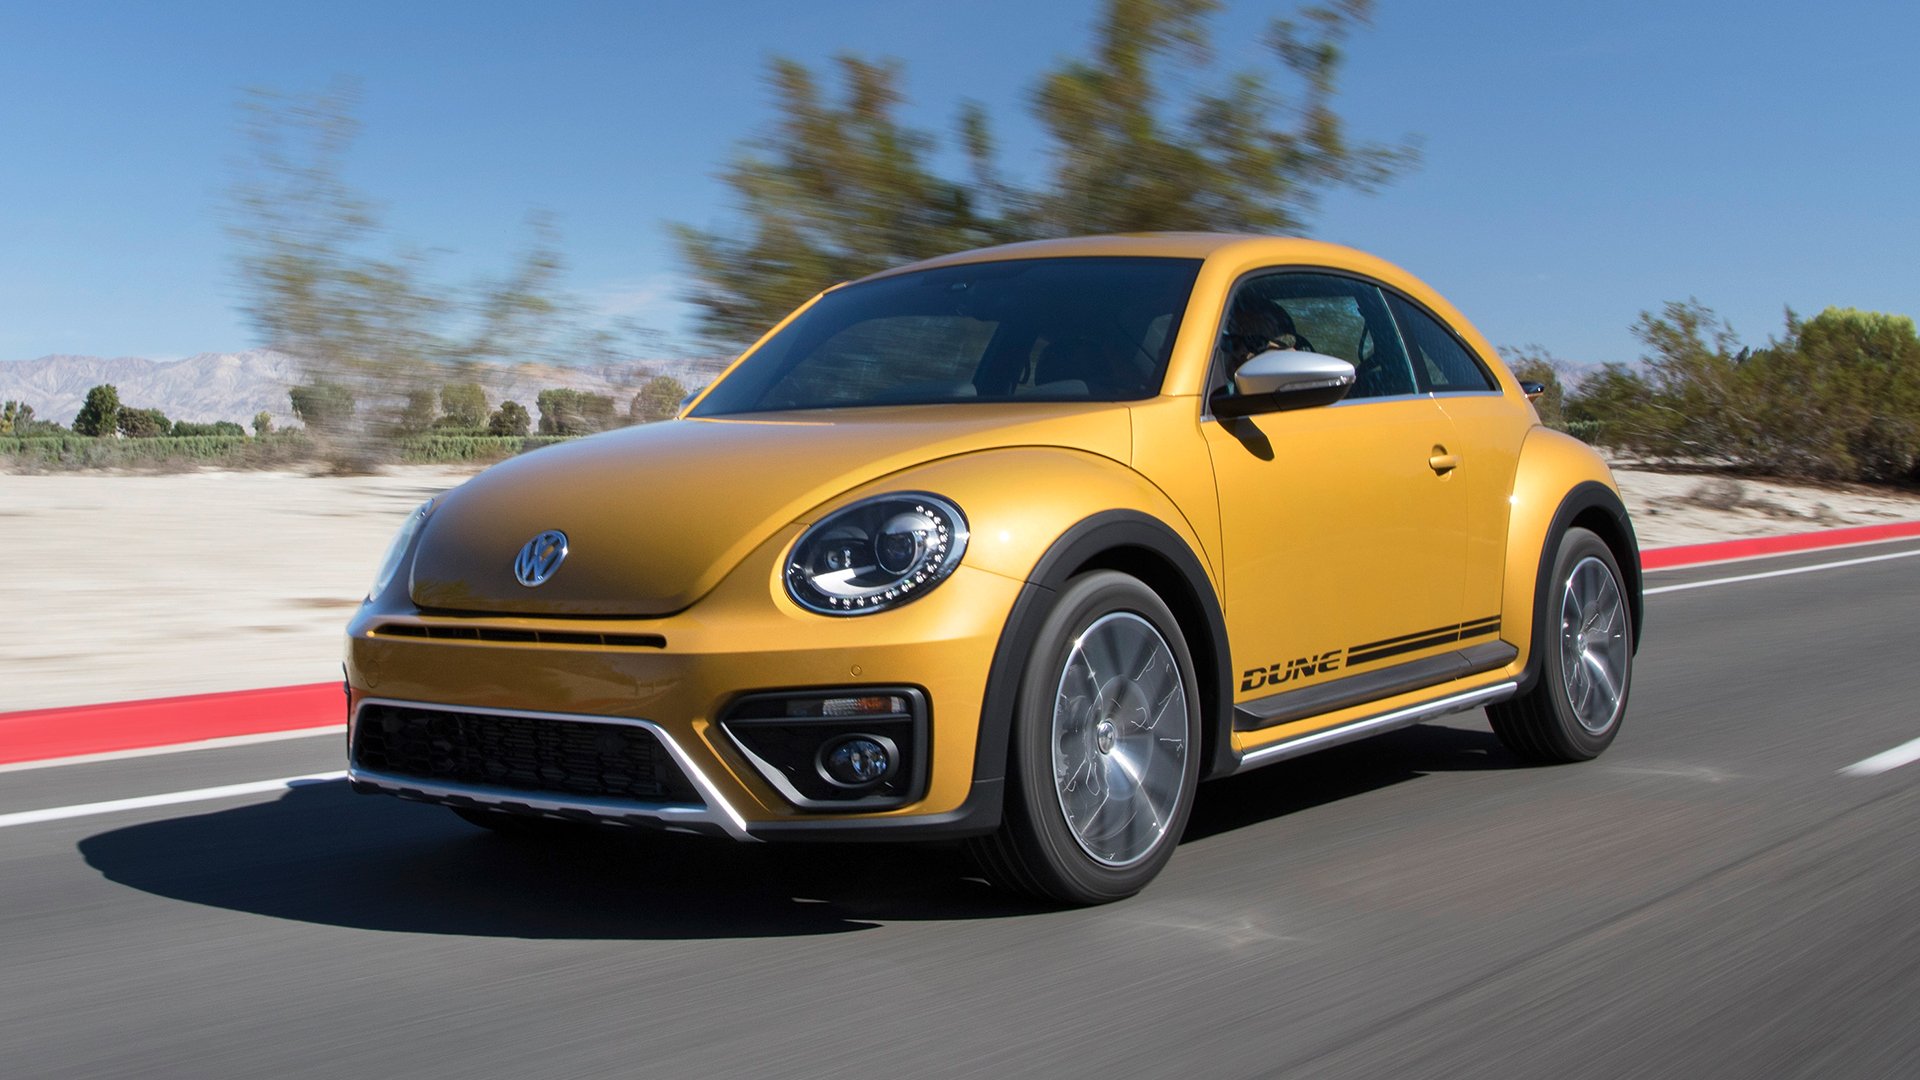 Volkswagen expands Beetle range with rugged new Dune | Auto Trader UK